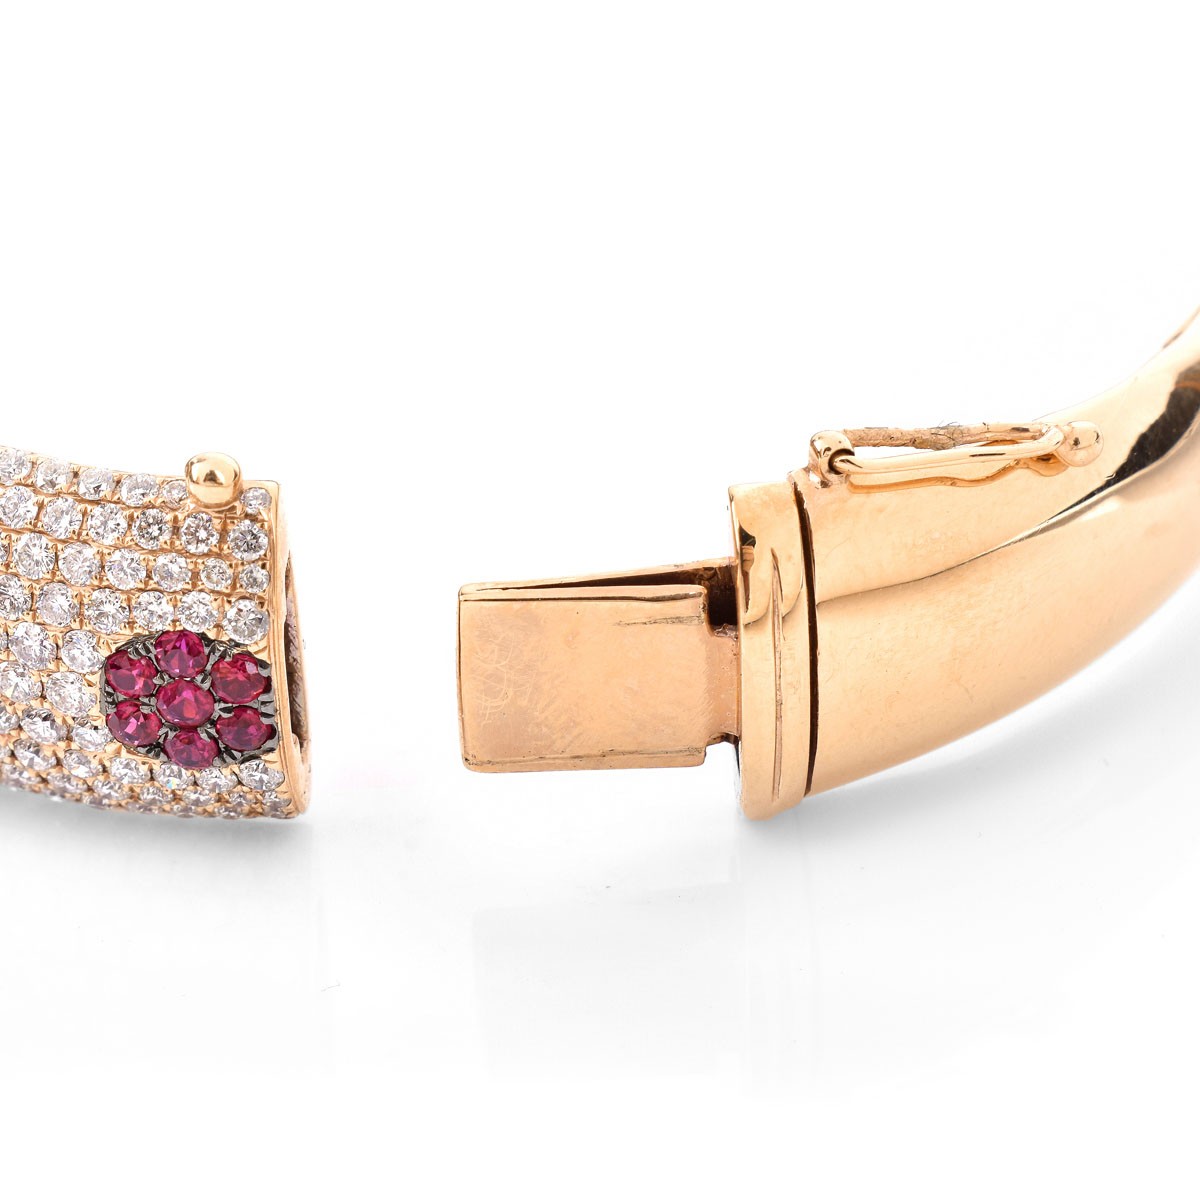 Contemporary Design 5.64 Carat Pave Set Round Cut Ruby, 5.08 Carat Round Cut Diamond and 18 Karat Rose Gold Hinged Bangle Bracelet. Rubies with vivid saturation of color.